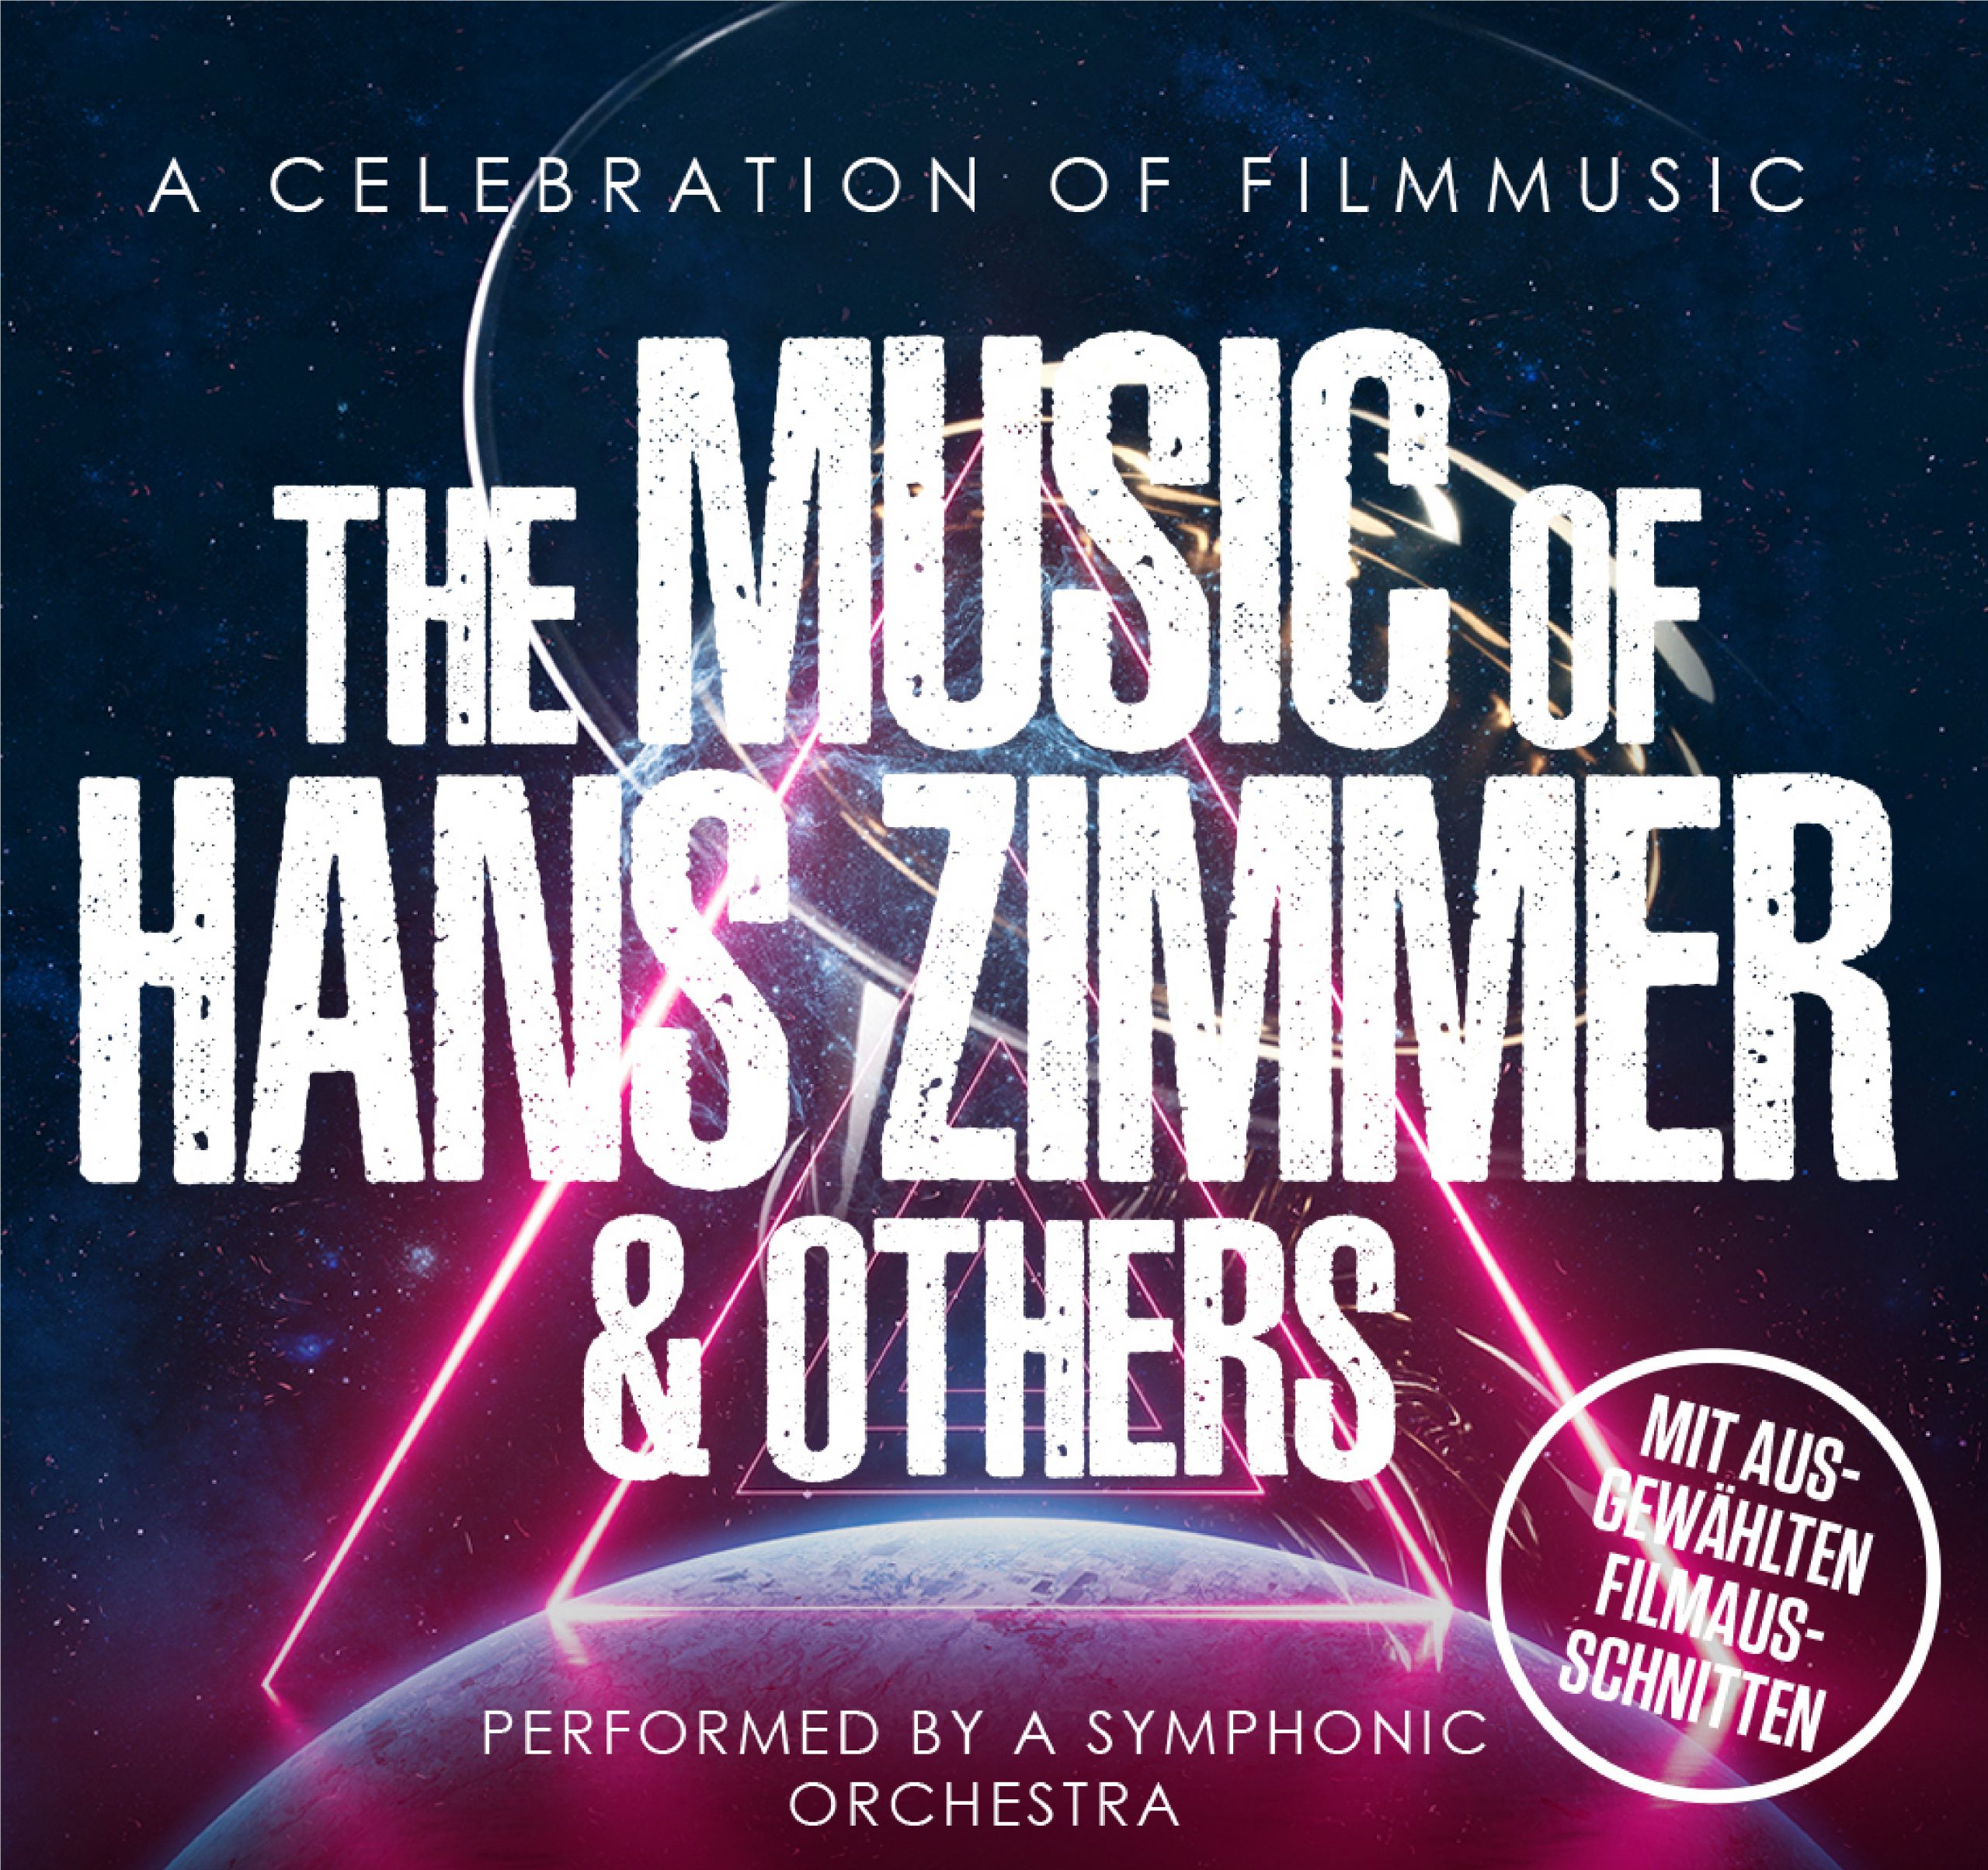 Hans Zimmer - Albums, Songs, and News